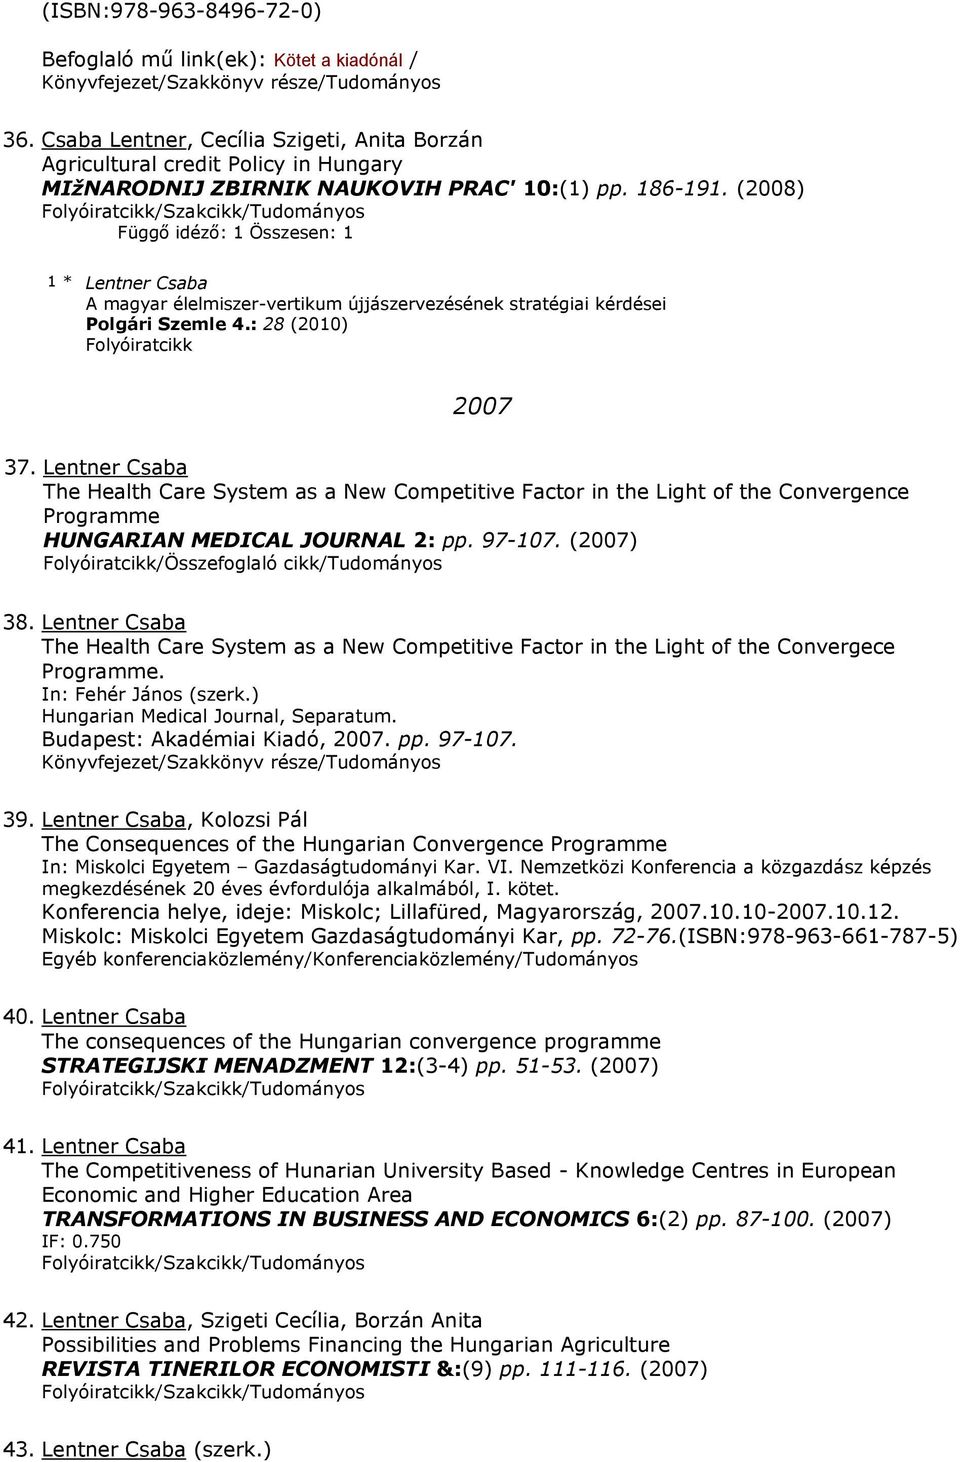 Lentner Csaba The Health Care System as a New Competitive Factor in the Light of the Convergence Programme HUNGARIAN MEDICAL JOURNAL 2: pp. 97-107. (2007) 38.